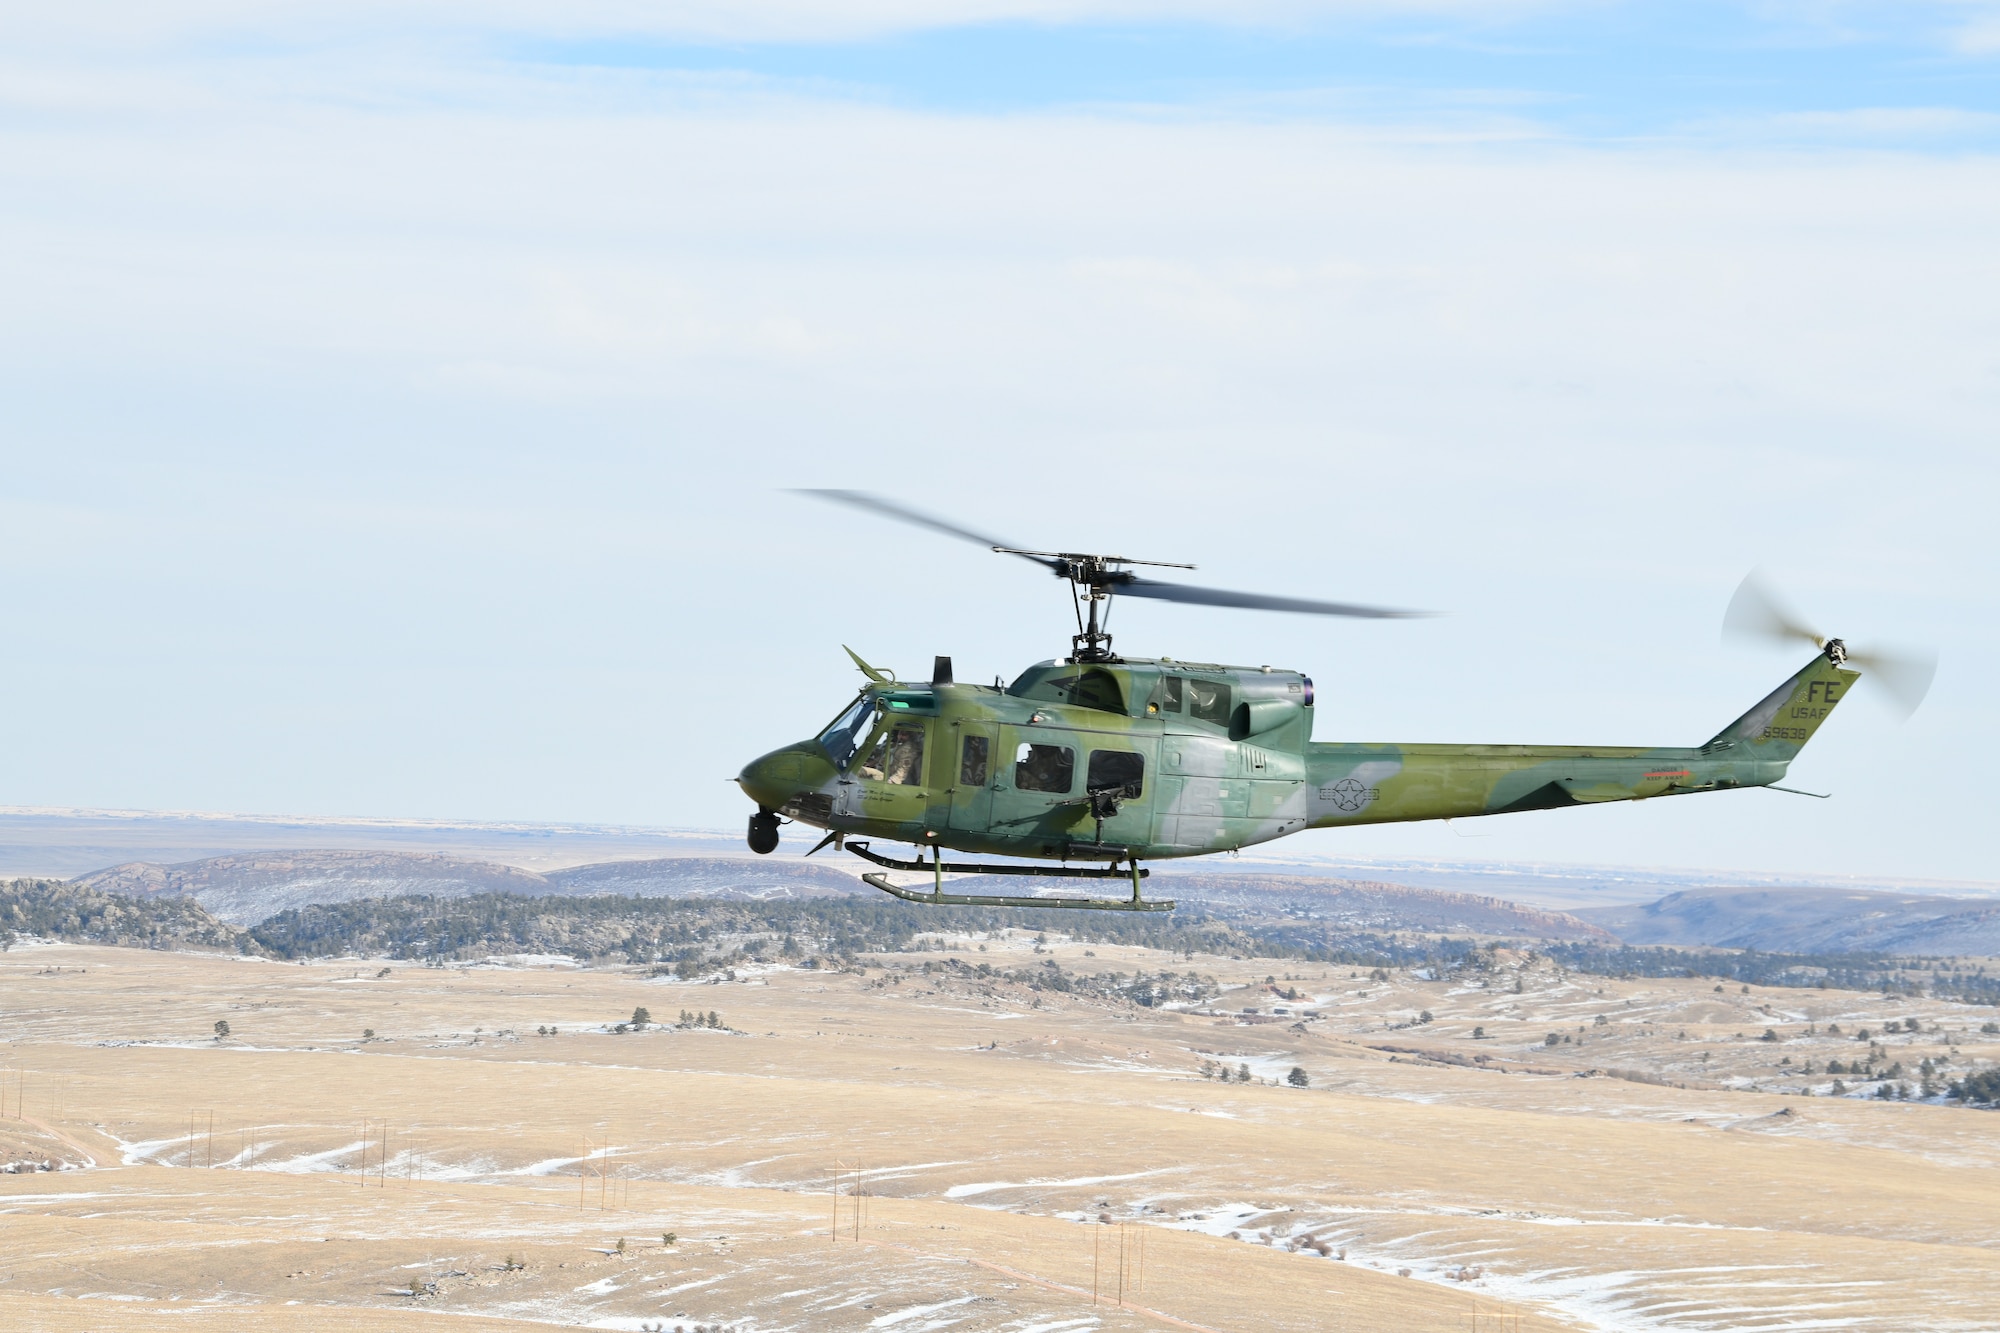 A helicopter from the 37th Helicopter Squadron flies over fields and hills in southeast Wyoming, February 15, 2022. The 37 HS flies through many different types of terrain for training purposes in order to stay mission ready and lethal at all times. (U.S. Air Force photo by Airman Sarah Post)